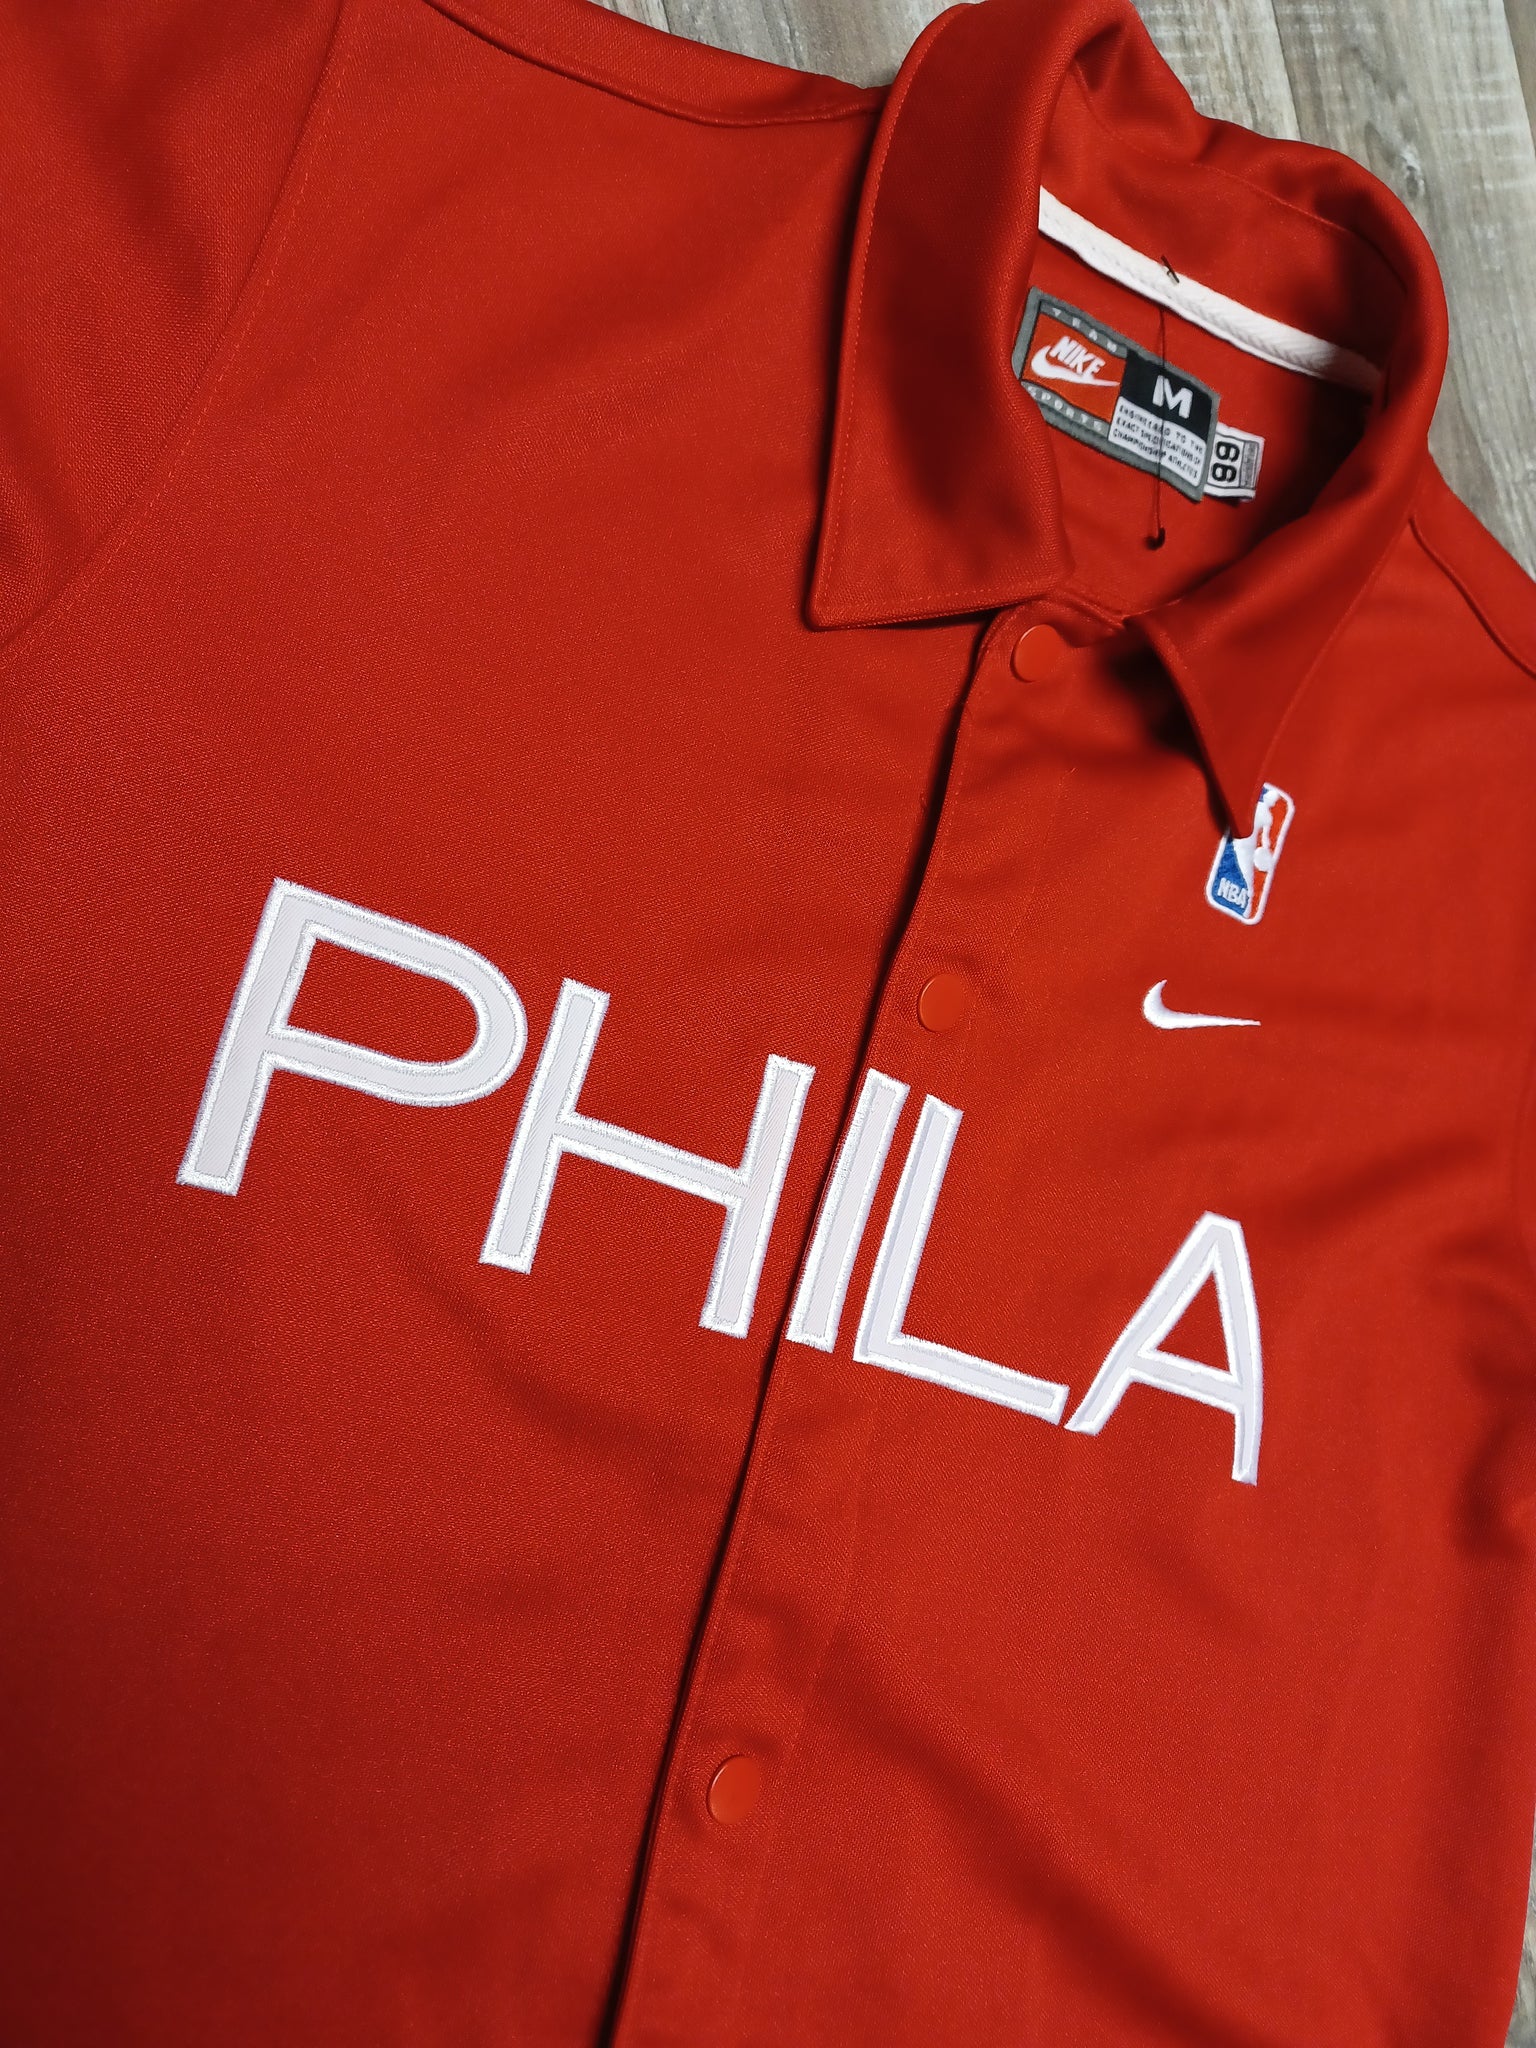 🏀 Philadelphia 76ers Warm Up Size Small – The Throwback Store 🏀